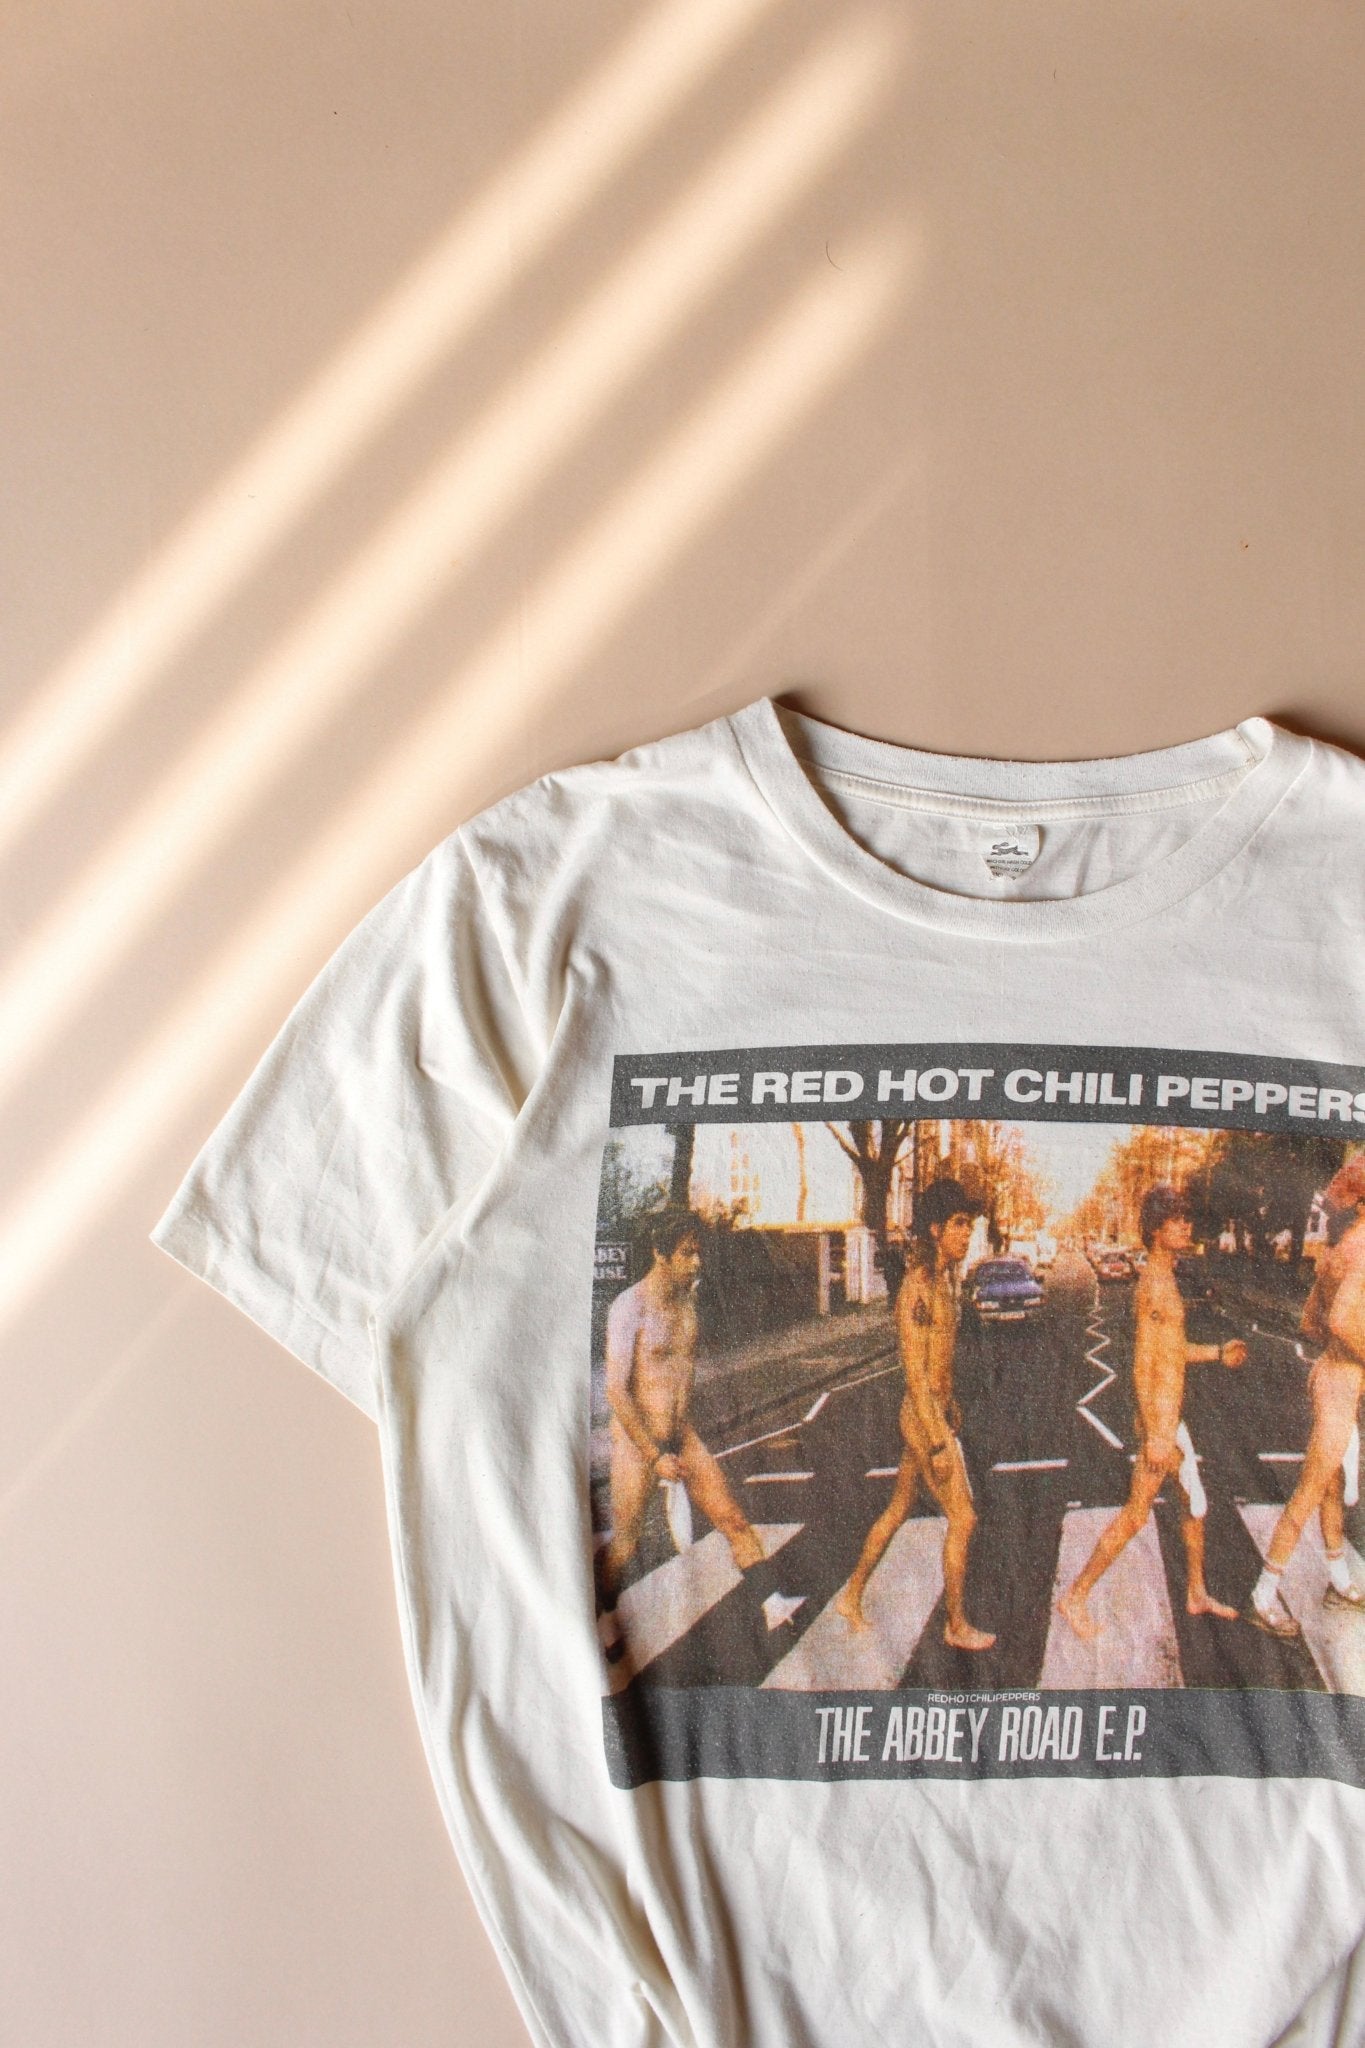 1990s Red Hot Chili Peppers “The Abbey Road E.P” Tee